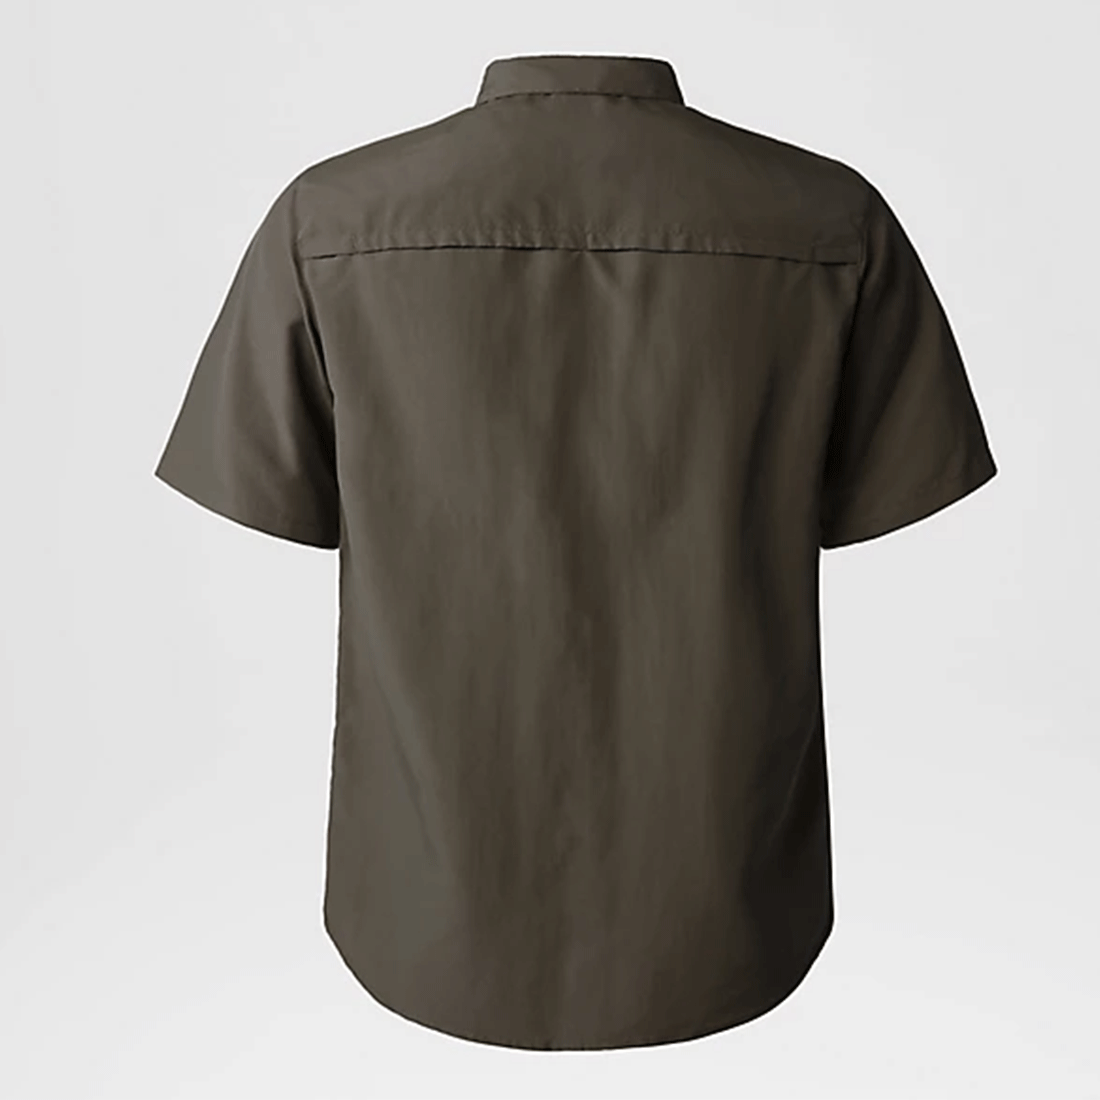 The North Face technical fabric shirt - Sequoia Shirt - Green